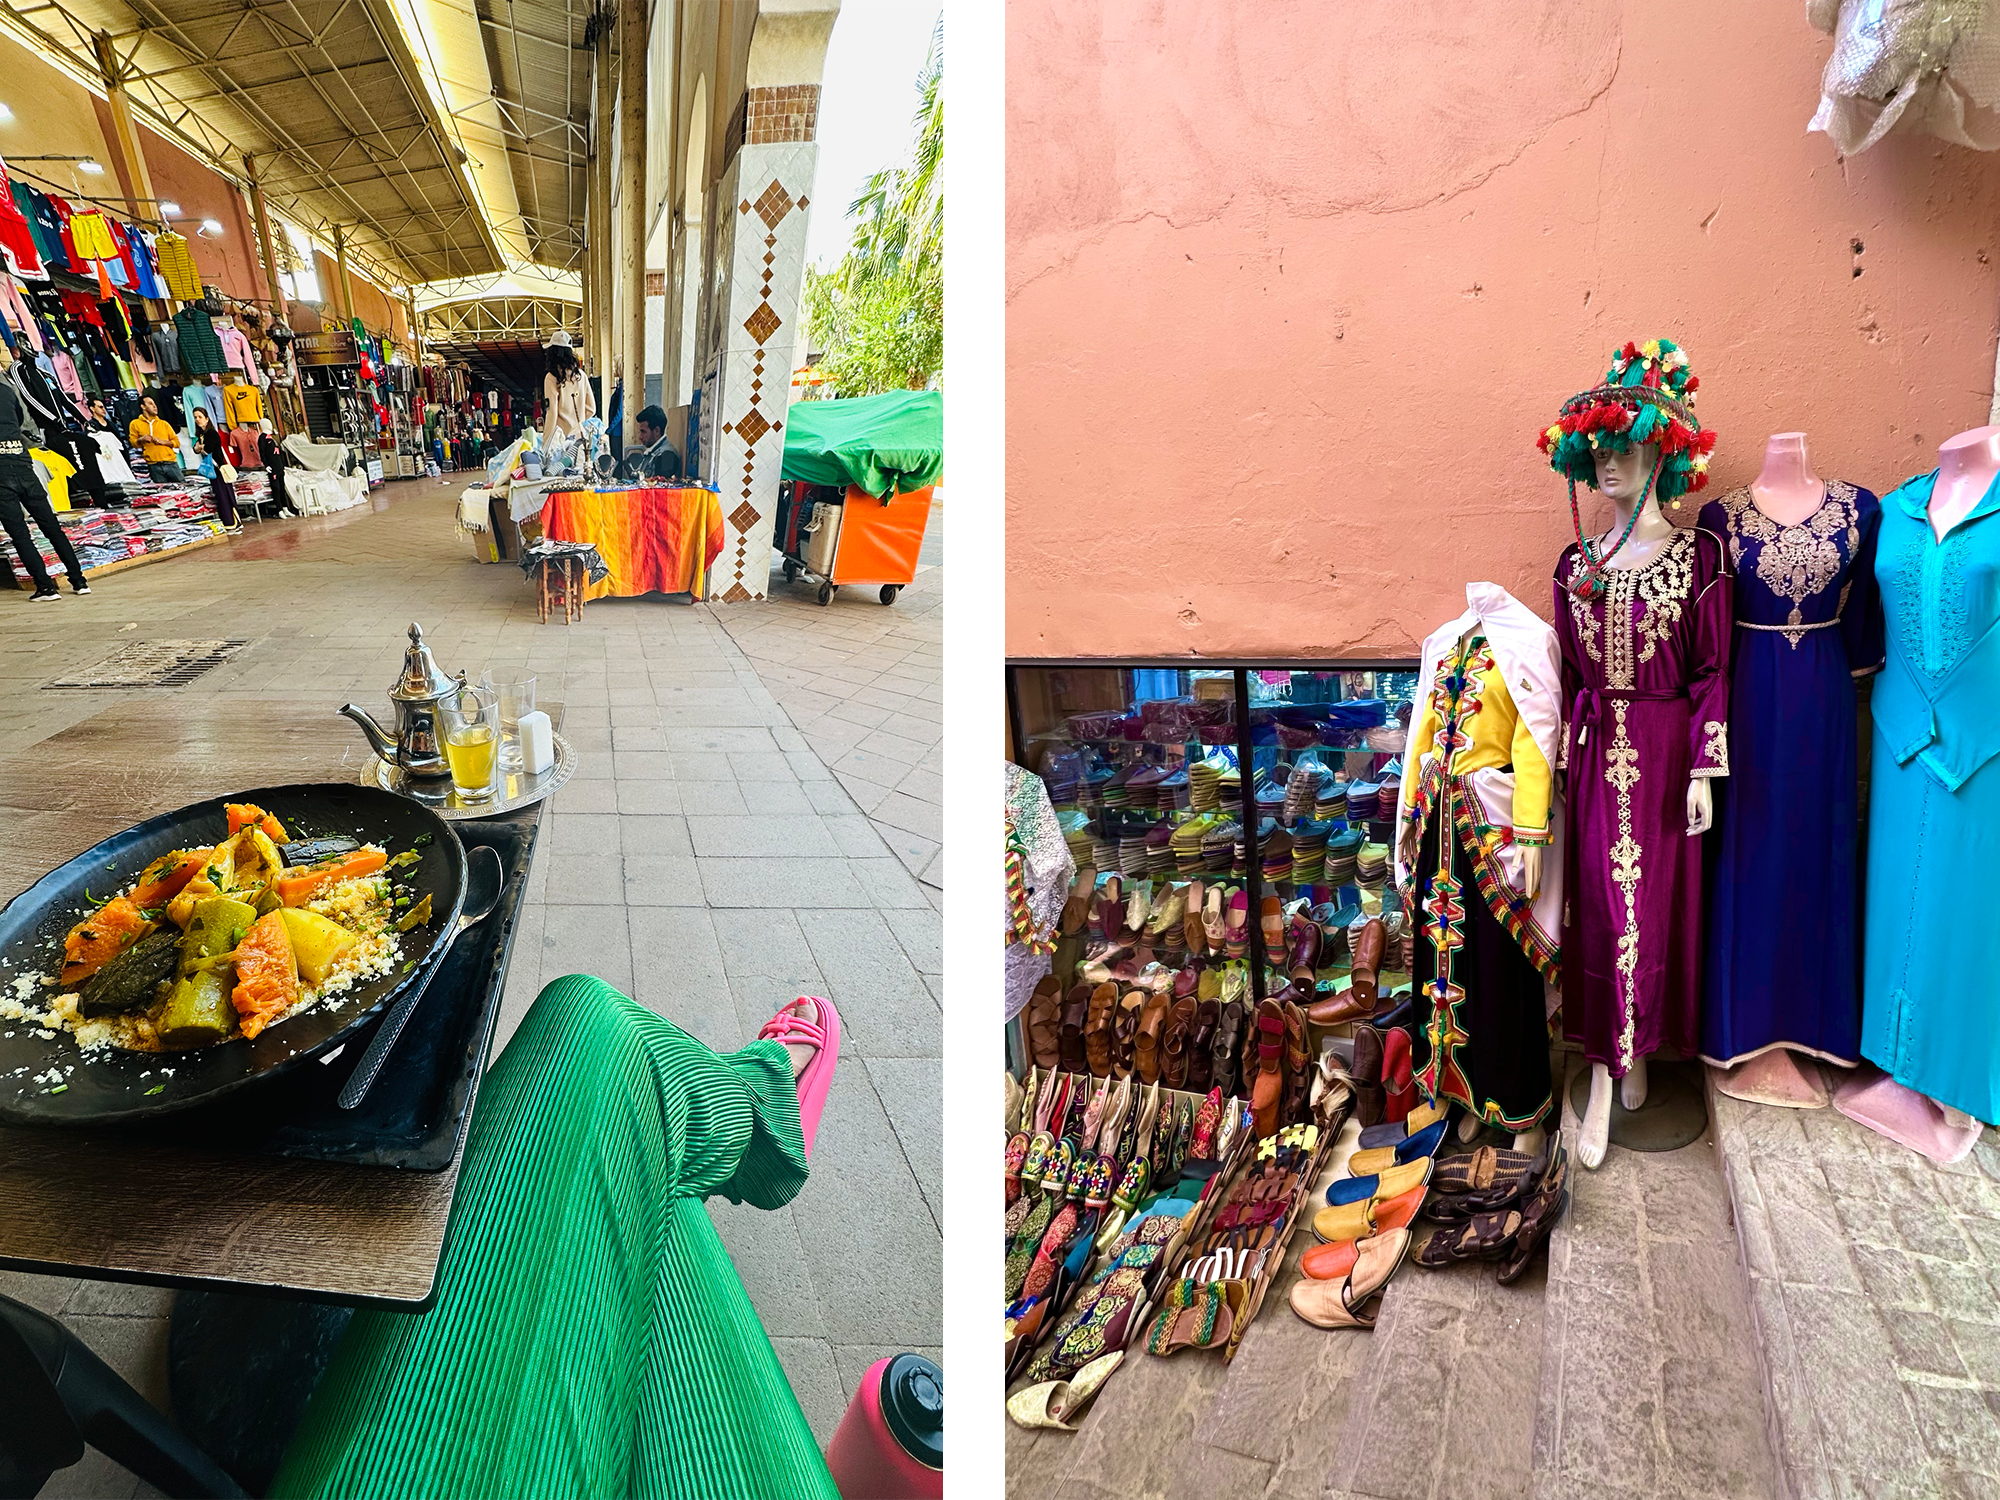 Euphoric Threads Travel Blog - Euphoric Escapades - The Adventures of Griffindor - The Ultimate Travel Guide to Shopping in Morocco. Agadir Souk El Had